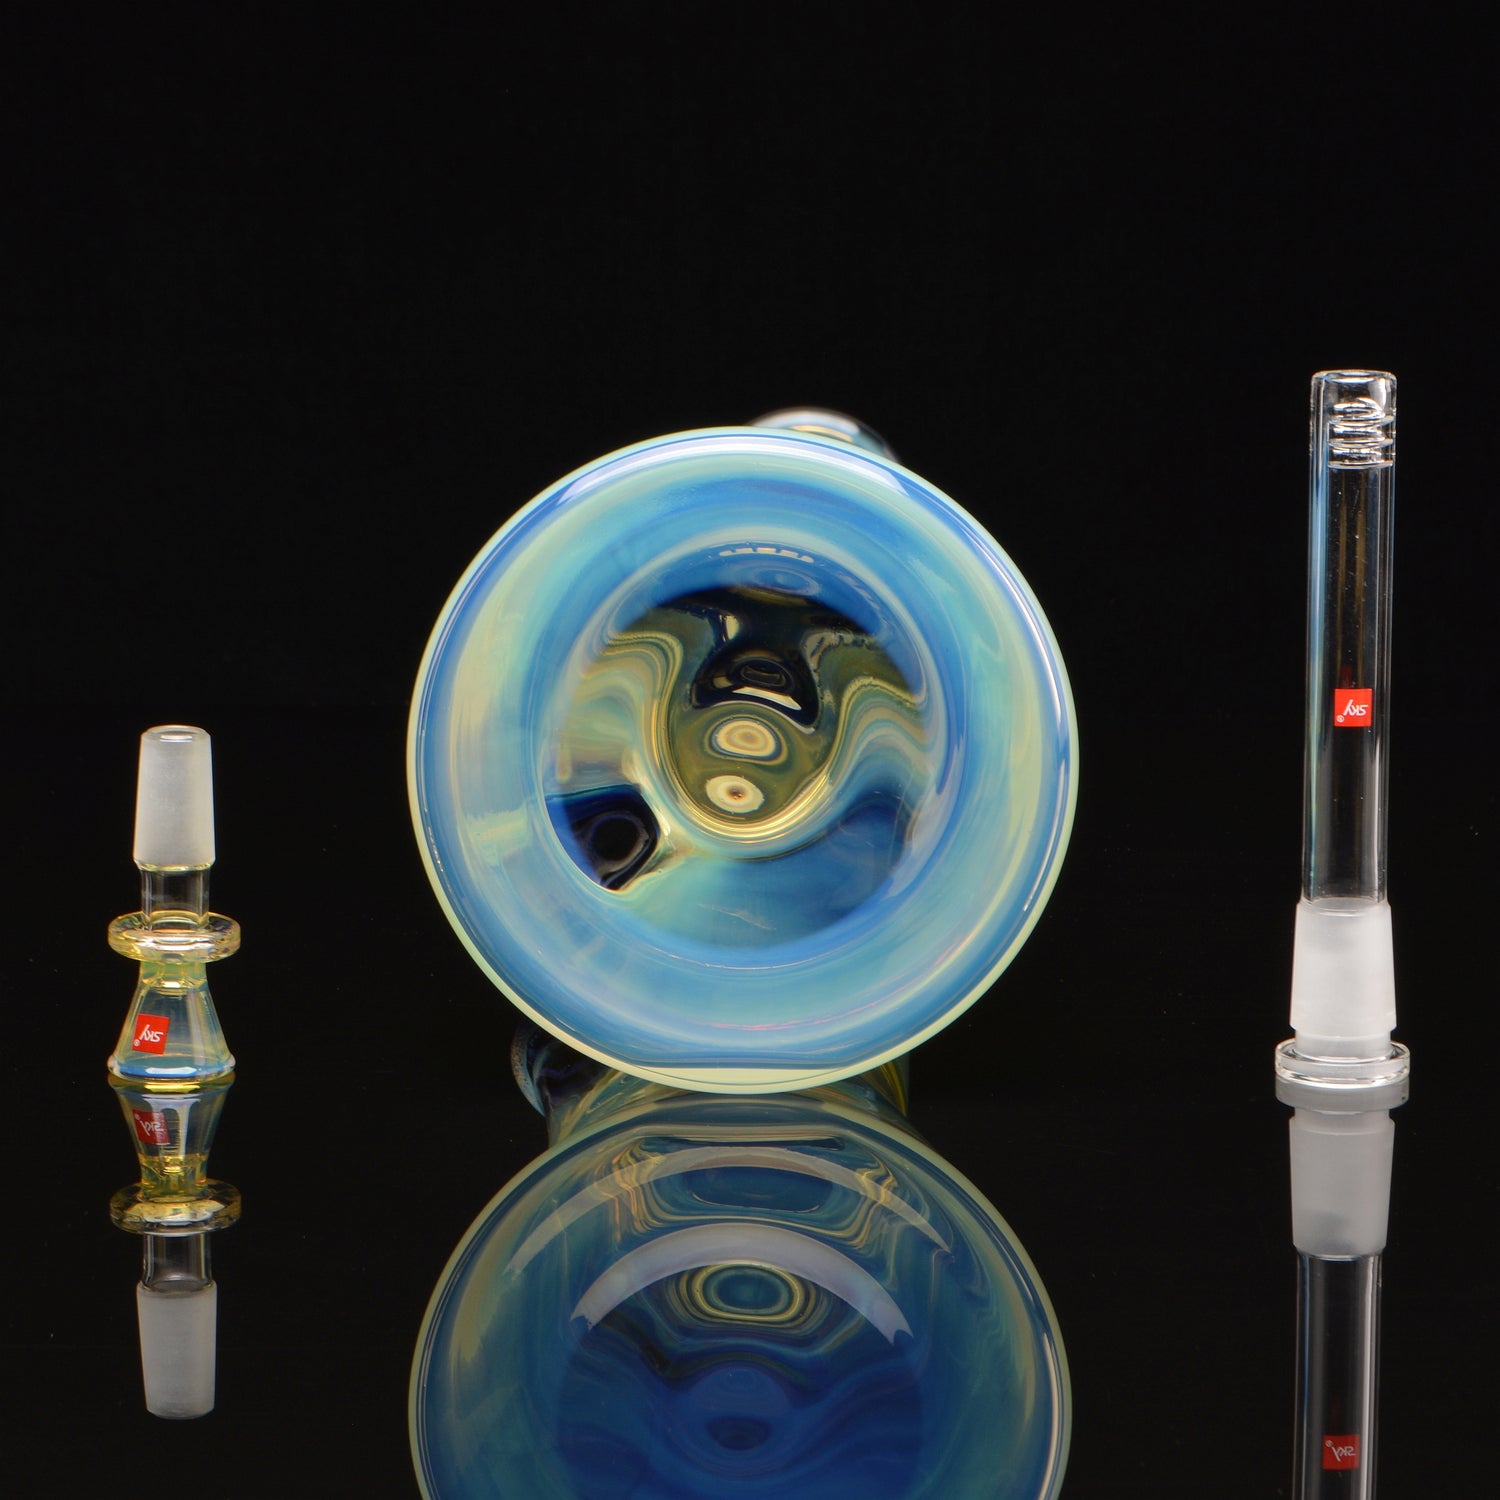 horizontal shot of the base, bowl piece and downstem